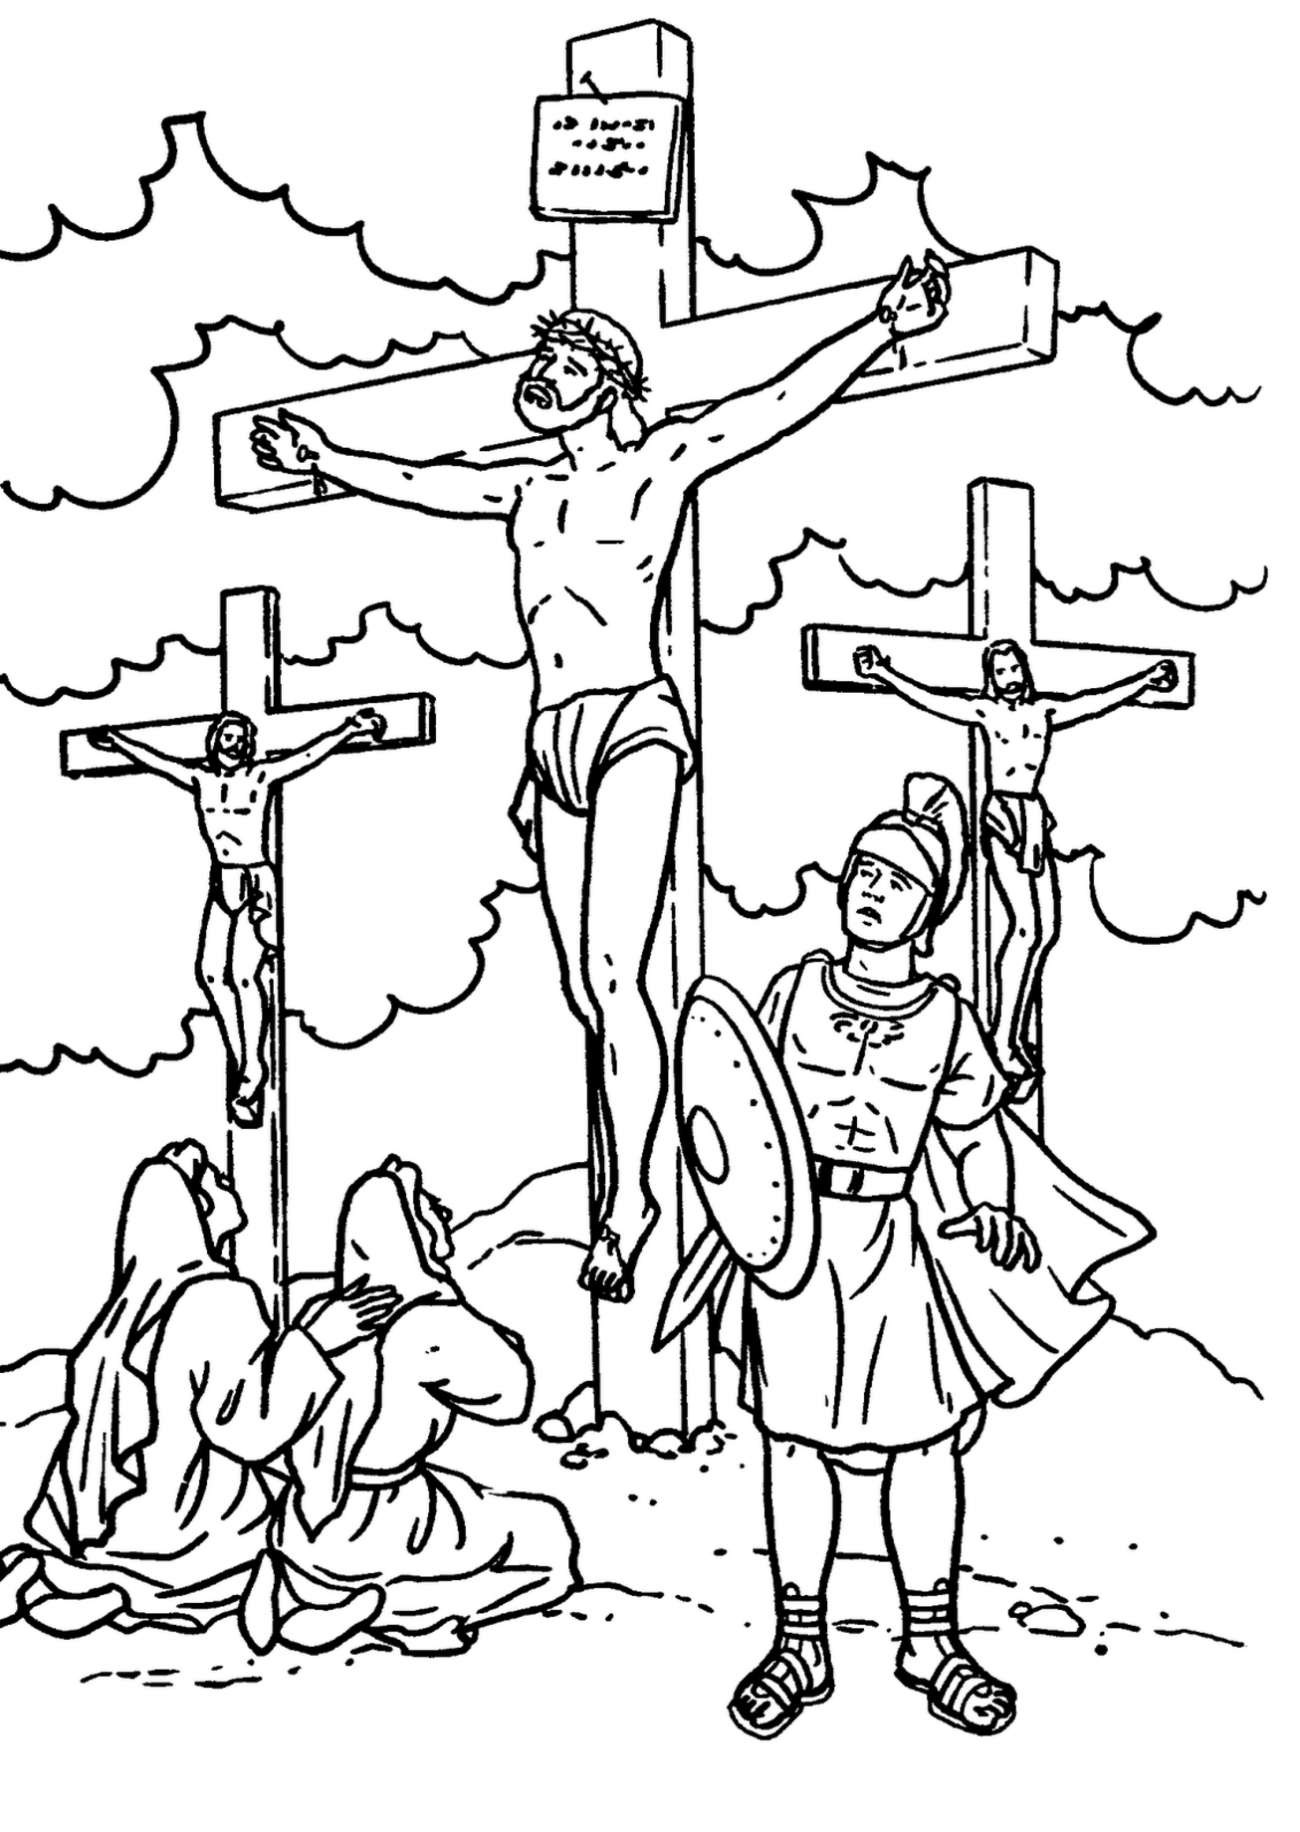 Bible Coloring Pages Cross - Coloring Pages For All Ages